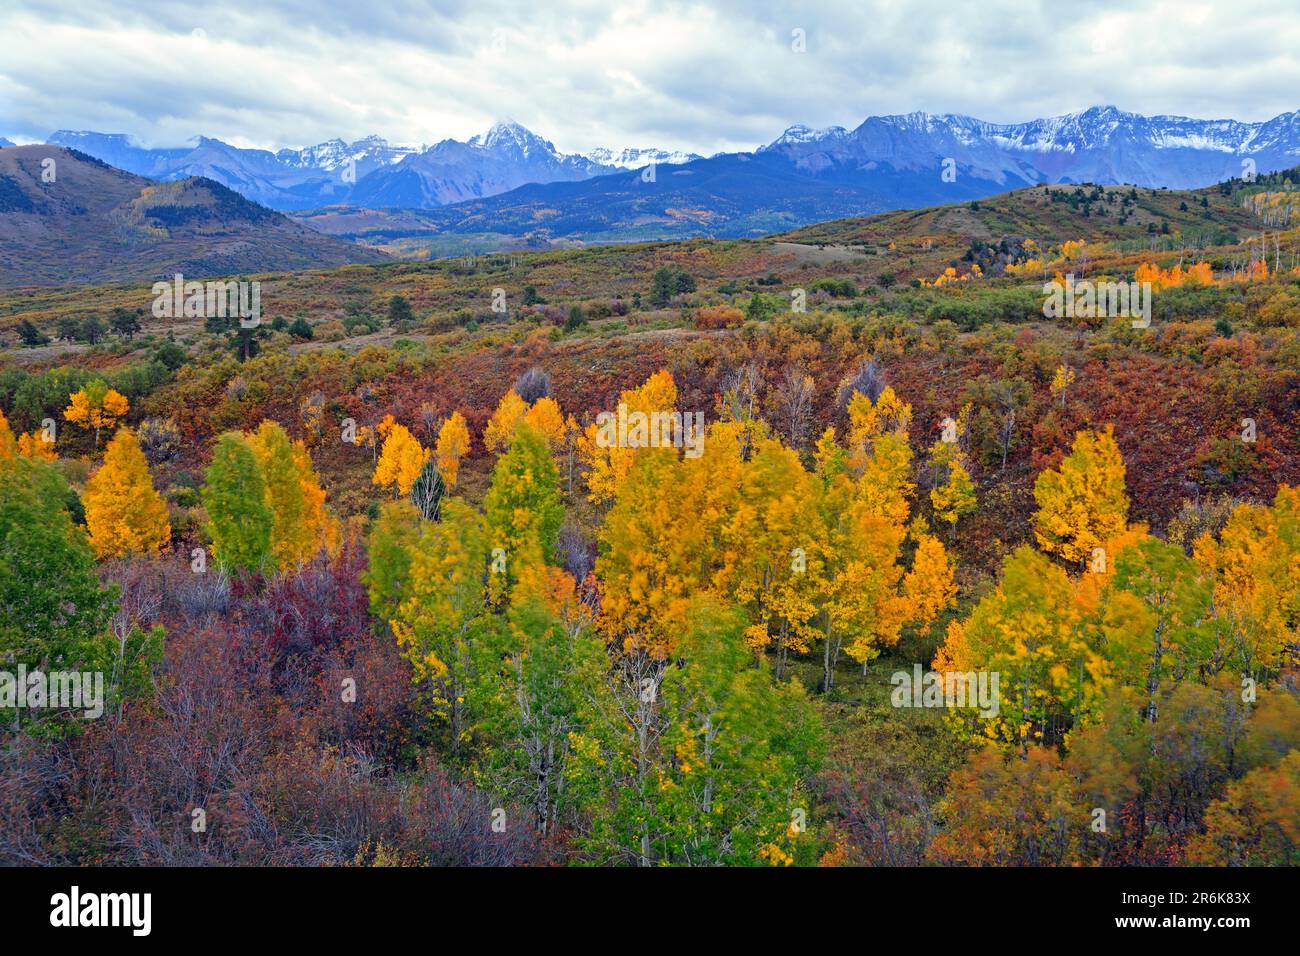 View from Dallas Divide to Sneffles Range, Ridgway, Colorado, USA Stock Photo